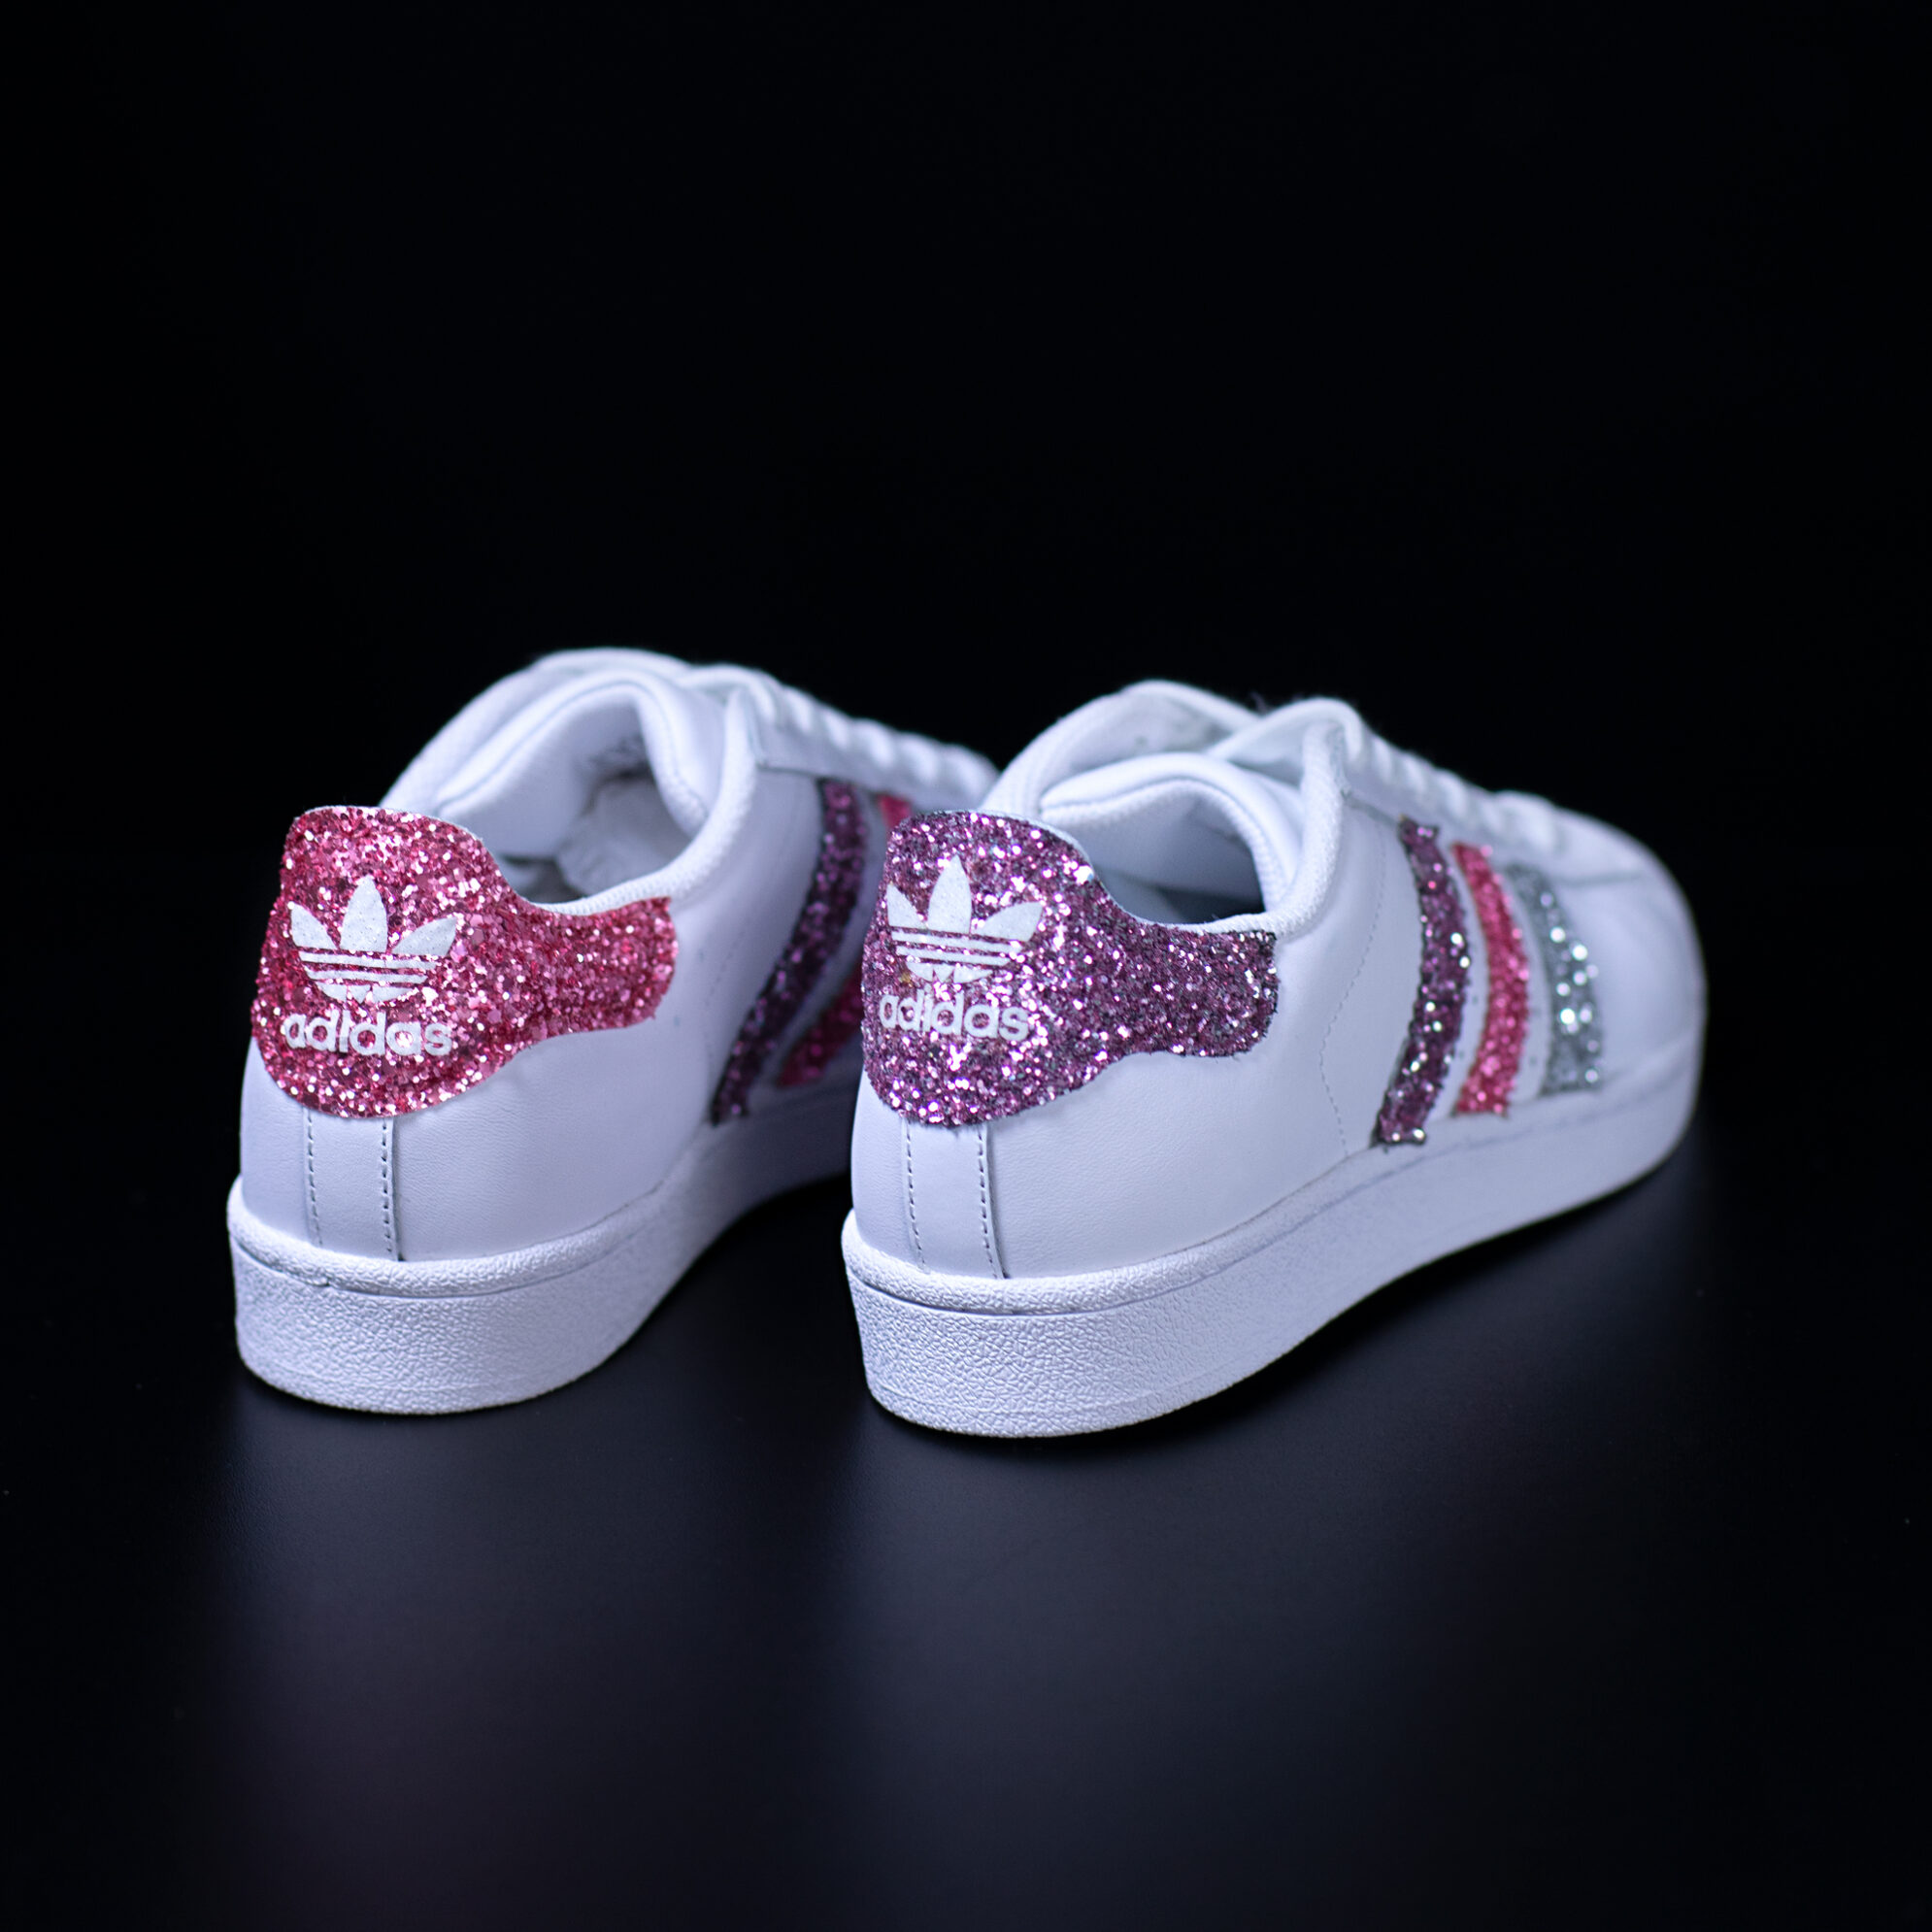 superstar better together adidas sneakers personalizzate glitter rosa da dressed